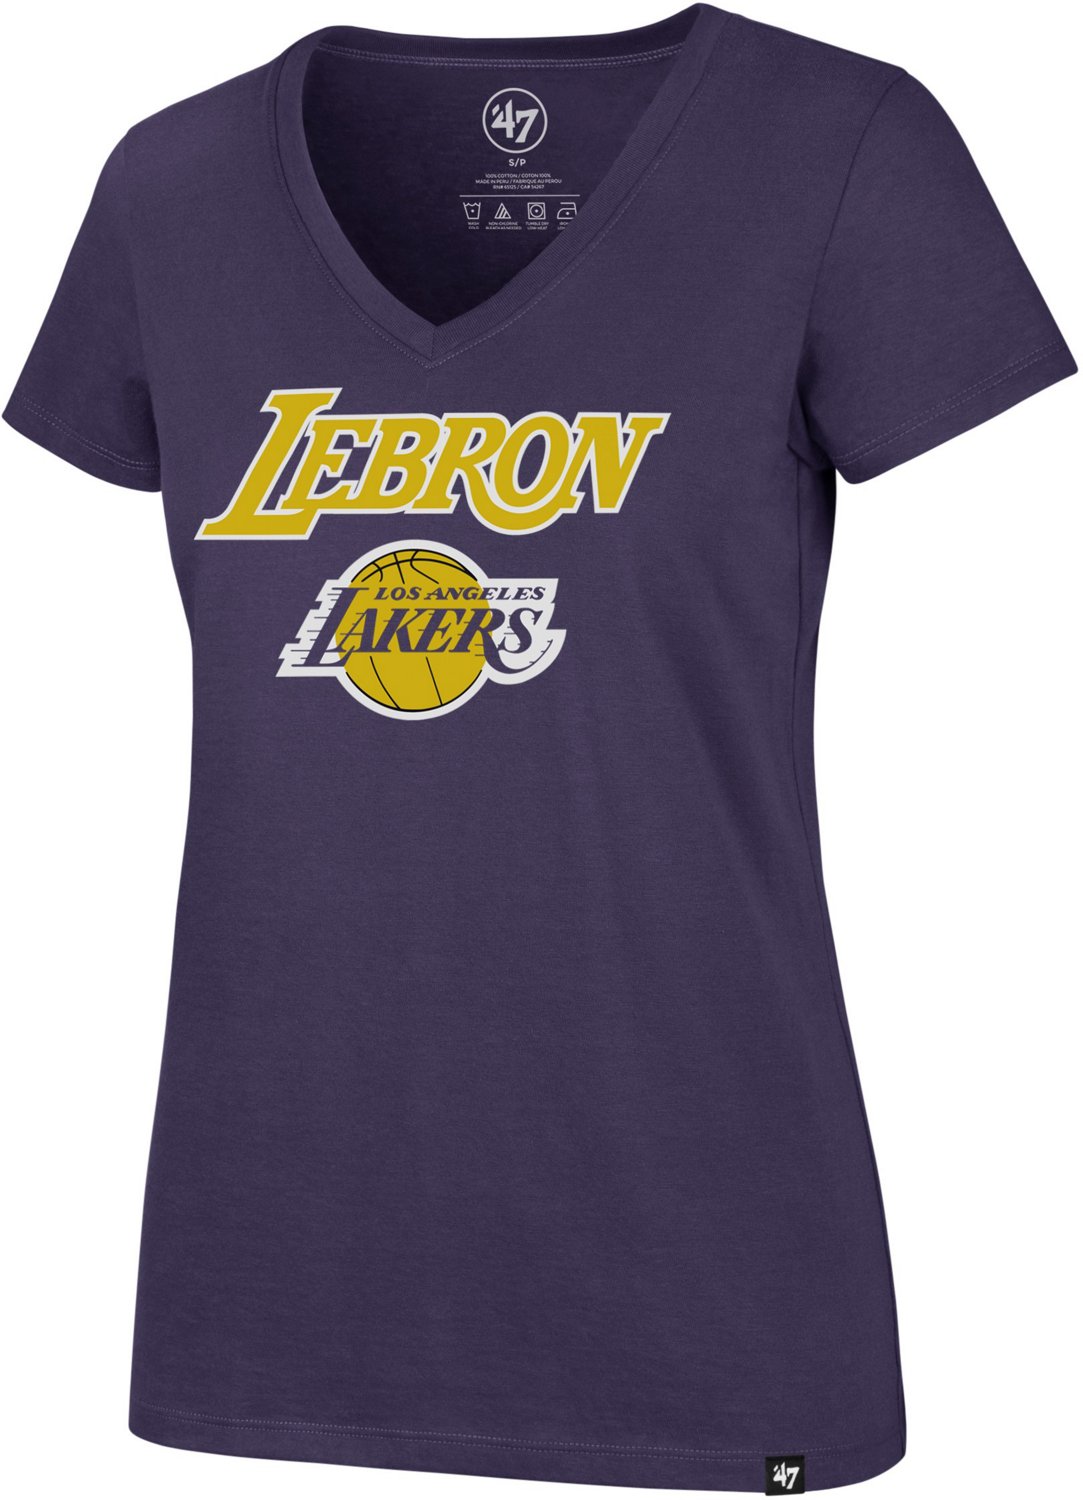 '47 Los Angeles Lakers Women's MVP Ultra Rival T-shirt | Academy